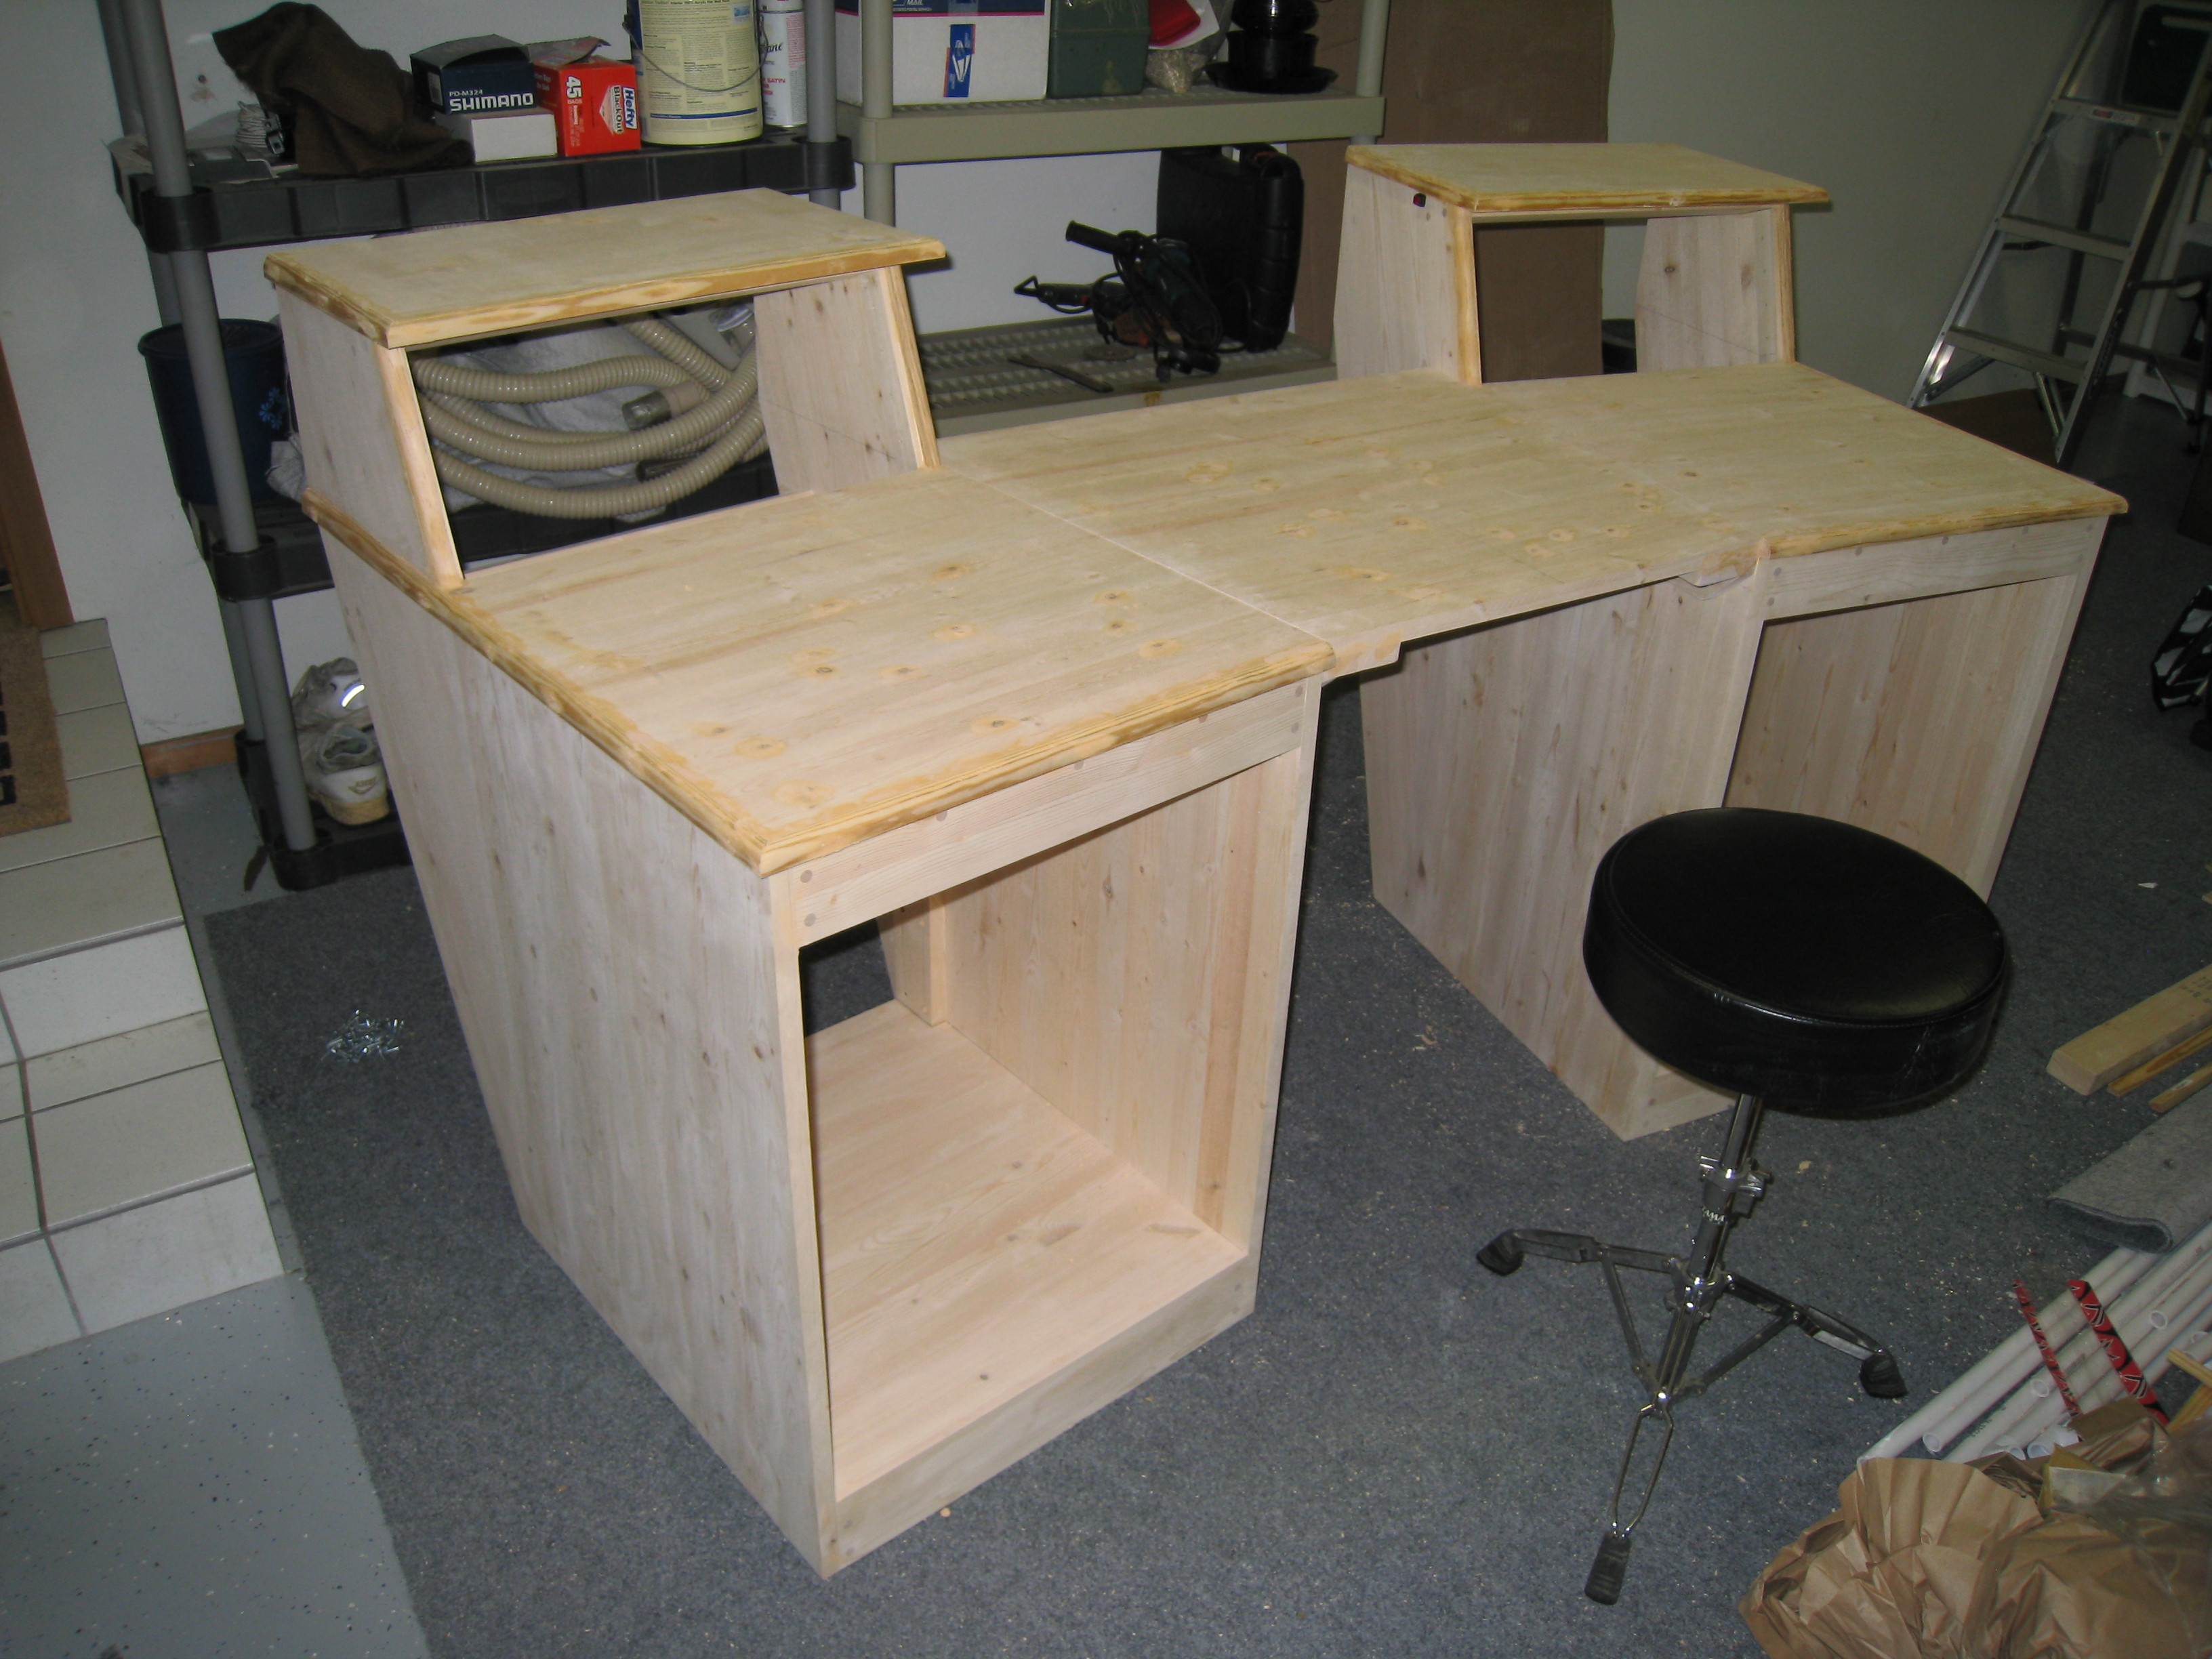 25 Of the Best Ideas for Diy Studio Desk Plans - Home Inspiration and